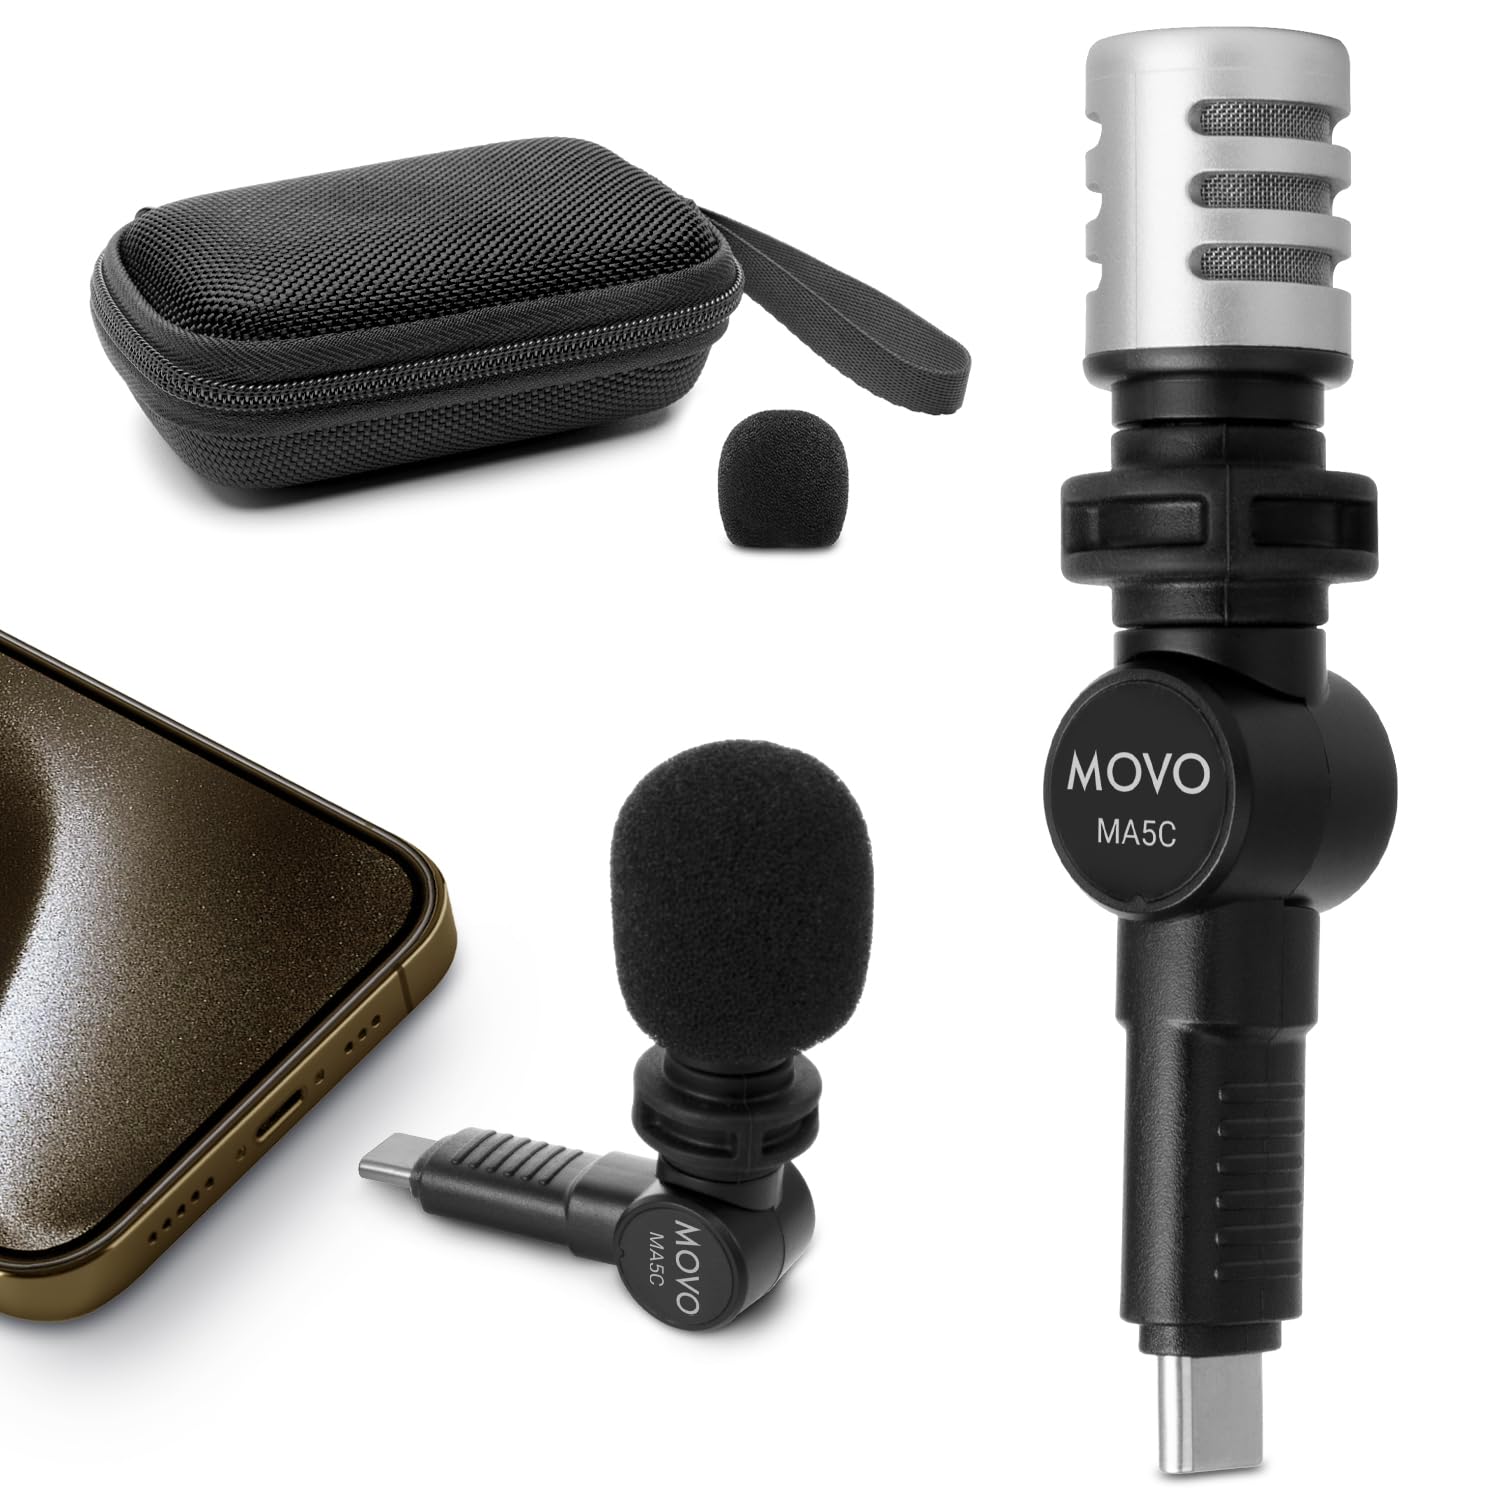 Movo External USB-C Microphone for iPhone 15 - Mic for iPhone 15, USB-C Devices - Portable Condenser Shotgun Mic for Video Recording, Voiceover, Interview, Travel, Vlogging, YouTube  - Like New